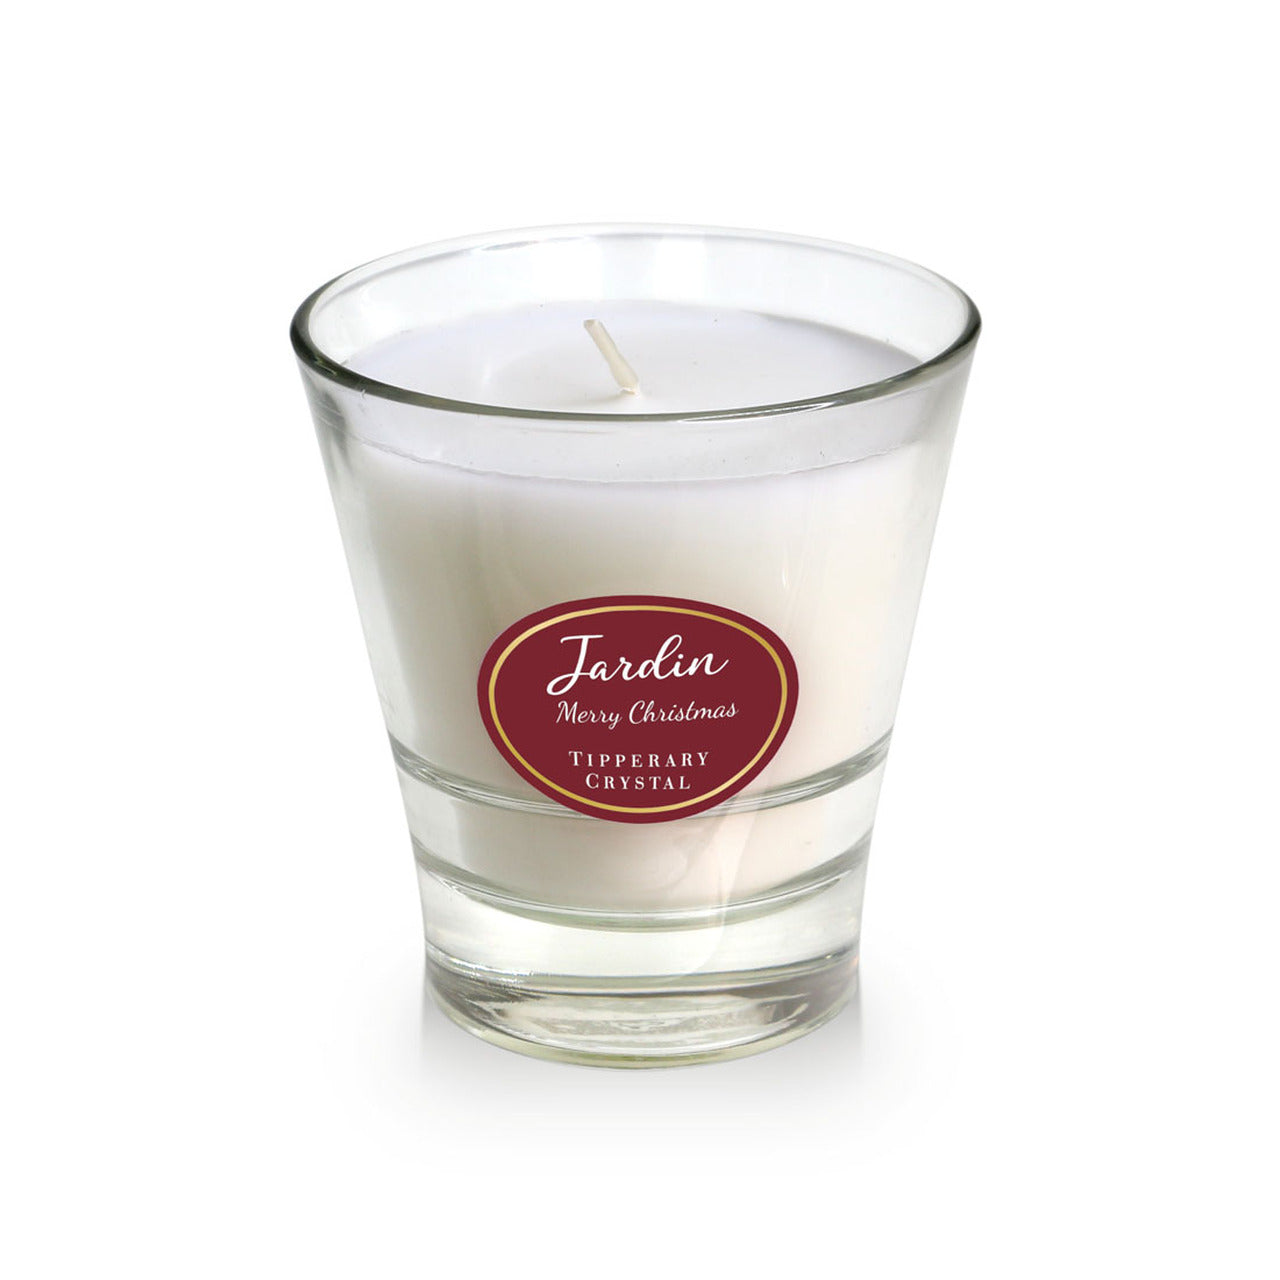 Tipperary Crystal Jardin Christmas Candle - Merry Christmas - NEW 2021  Transport yourself to a special place with the perfect fragrance for your home. Our scented candles will transform any room and will certainly set the right mood.